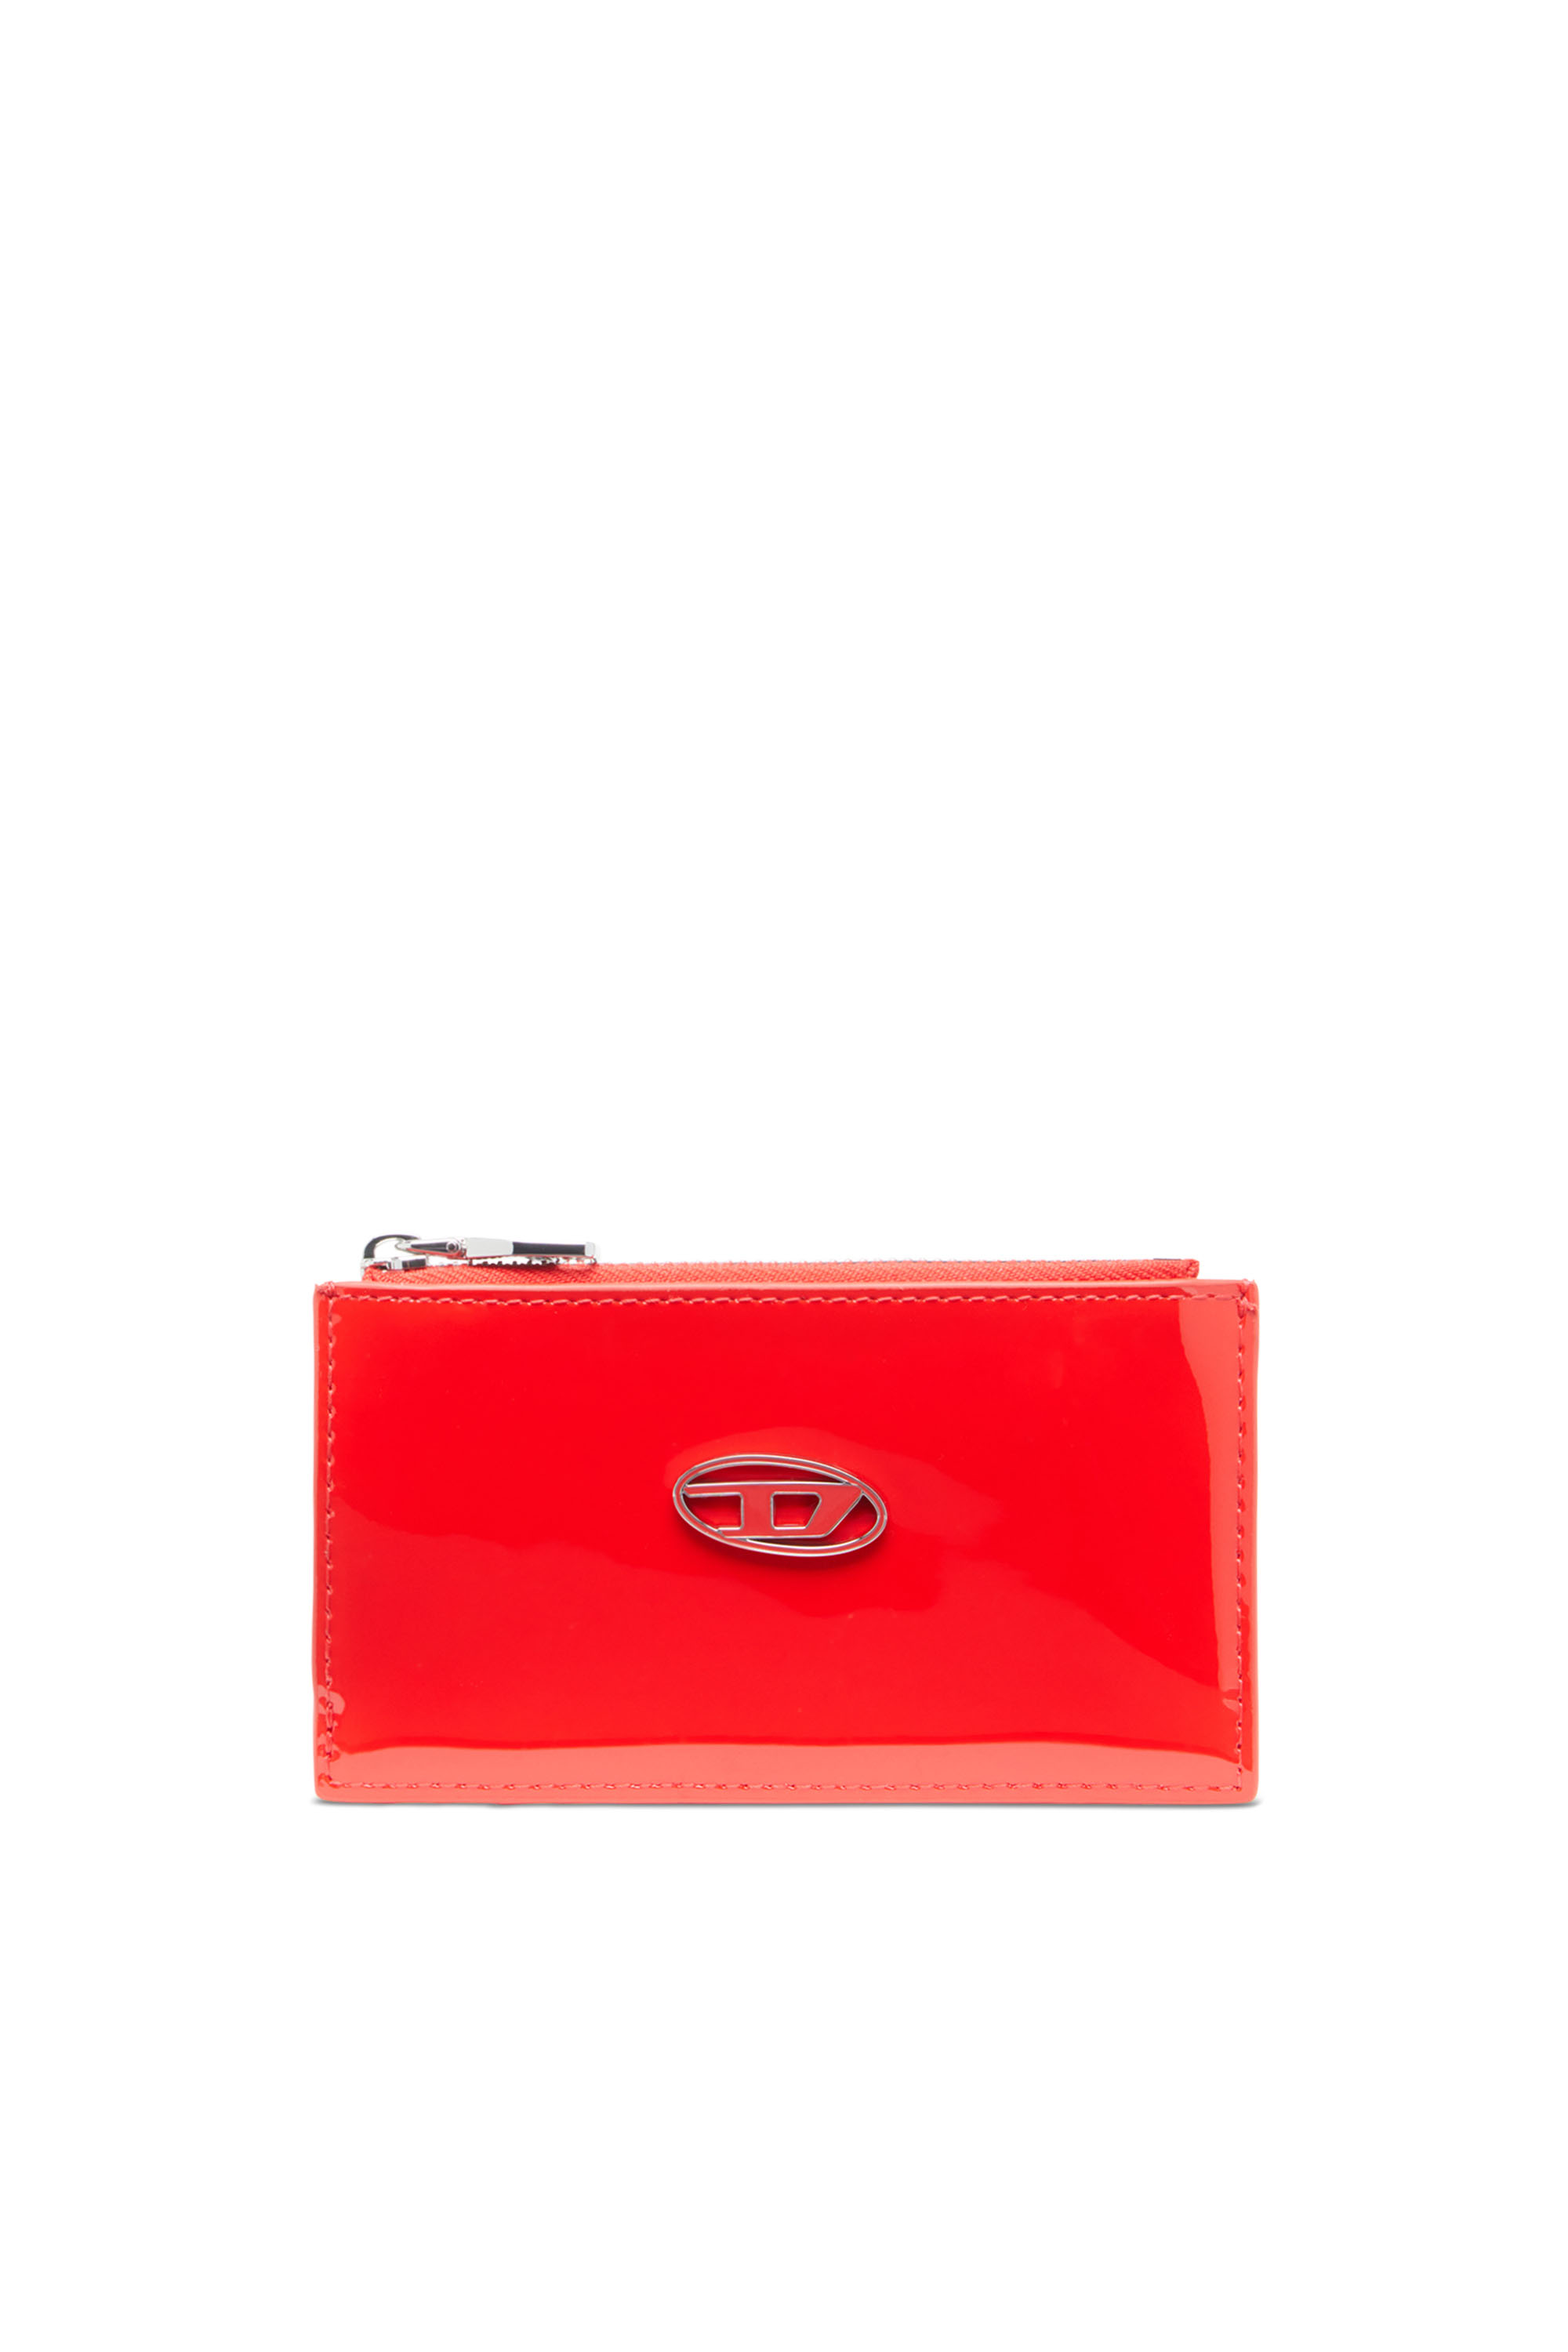 Diesel - PLAY CARD HOLDER III, Female Card holder in glossy leather in レッド - Image 1